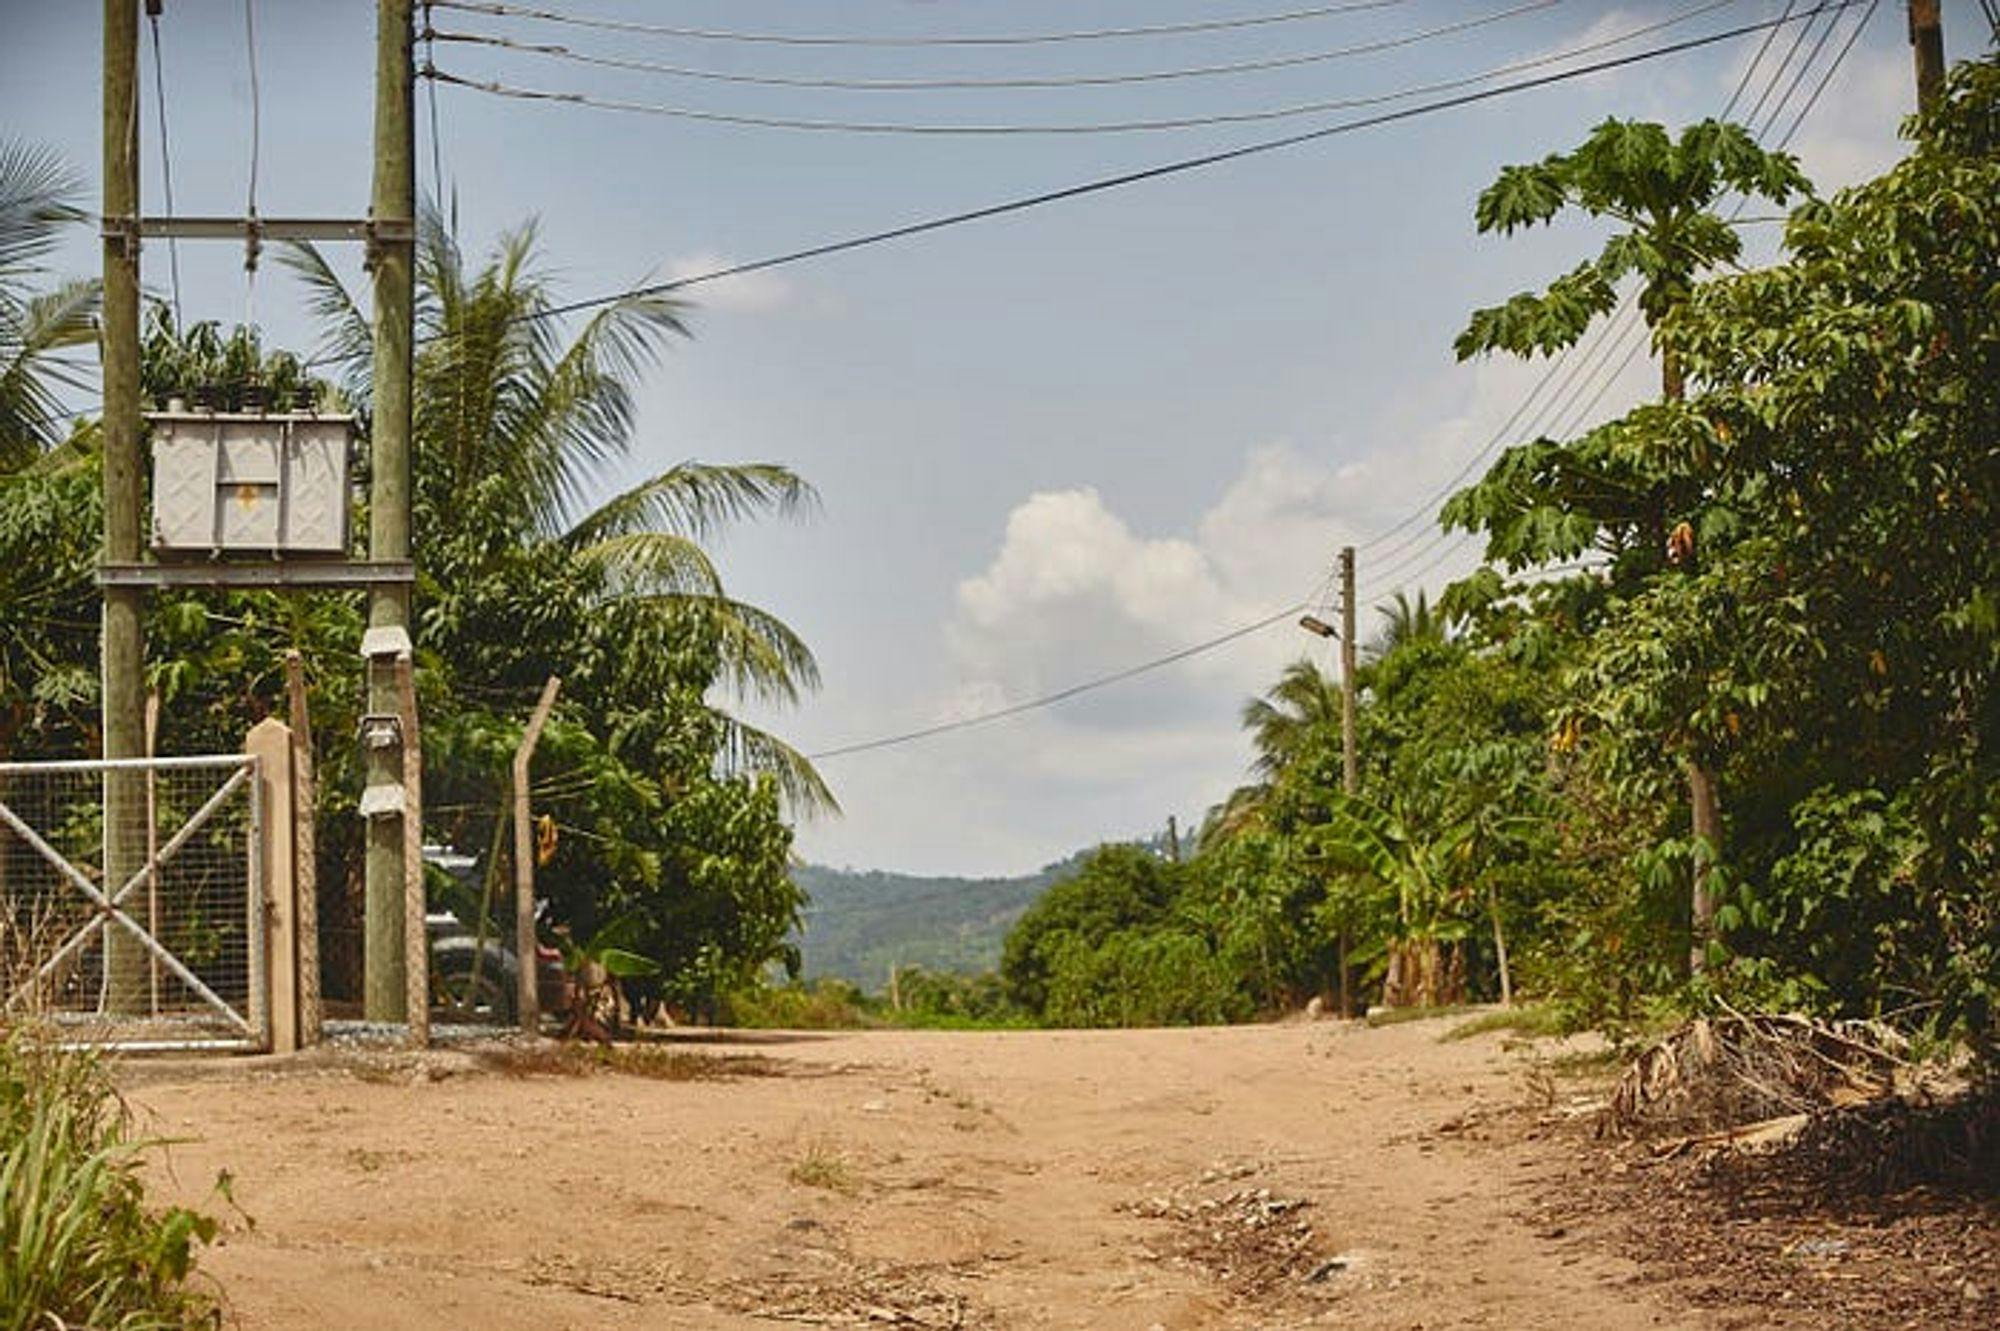 An area in Accra, Ghana where we are using PowerWatch to measure grid reliability. Distribution transformers and lines stand out in the landscape. While access to electricity remains a focus for many areas, the reliability of the service connection is critically important for increasing welfare but is often not measured with sufficient resolution (Photo credit: Daniel Essuah).